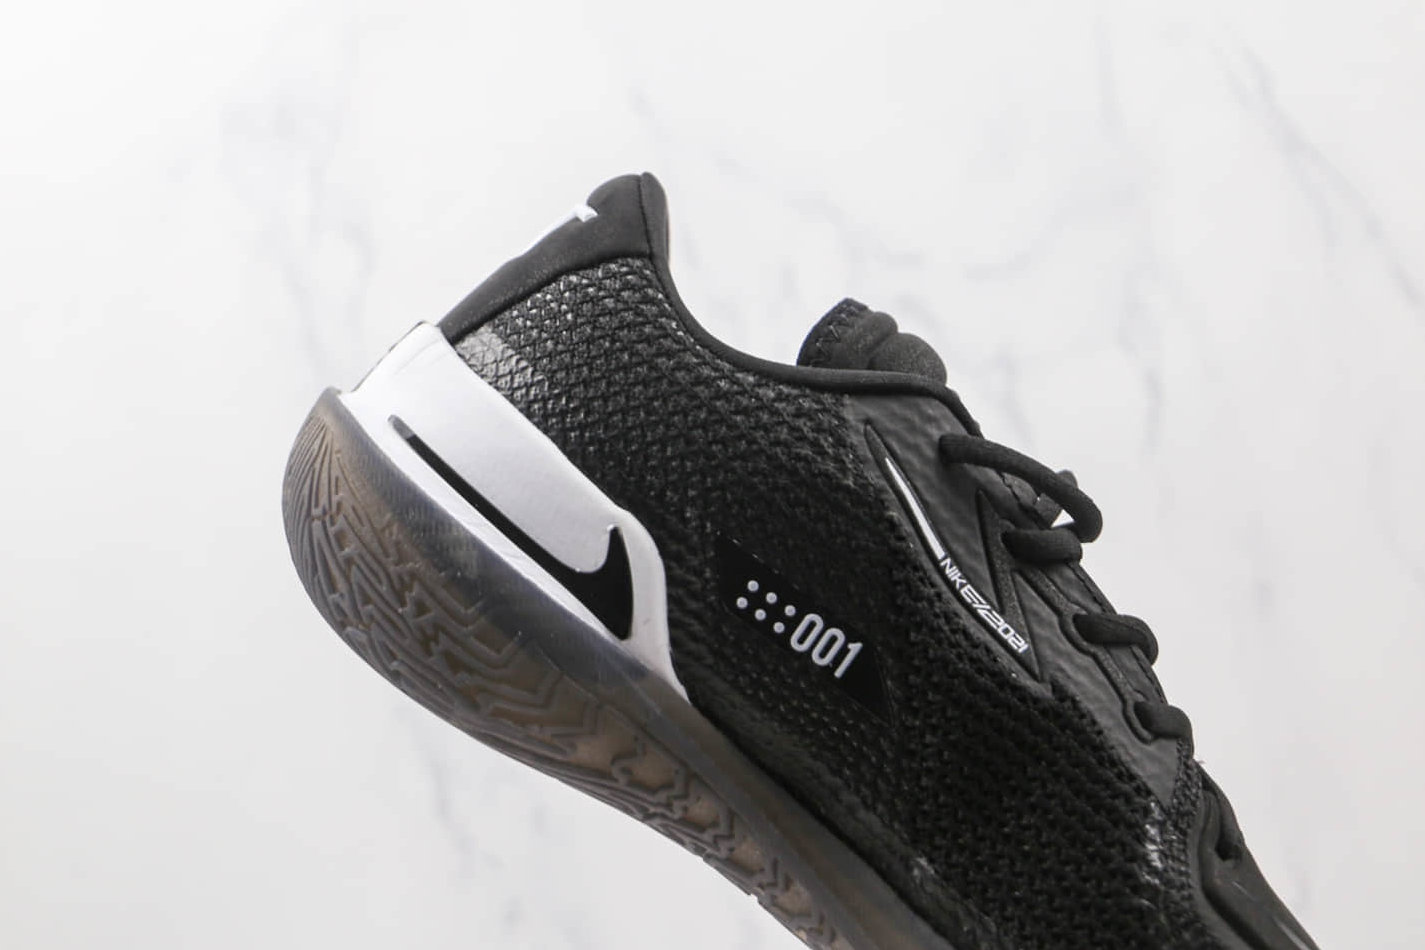 Nike Air Zoom GT Cut Black White Shoes CZ0176-002 | Premium Performance Footwear for Athletes